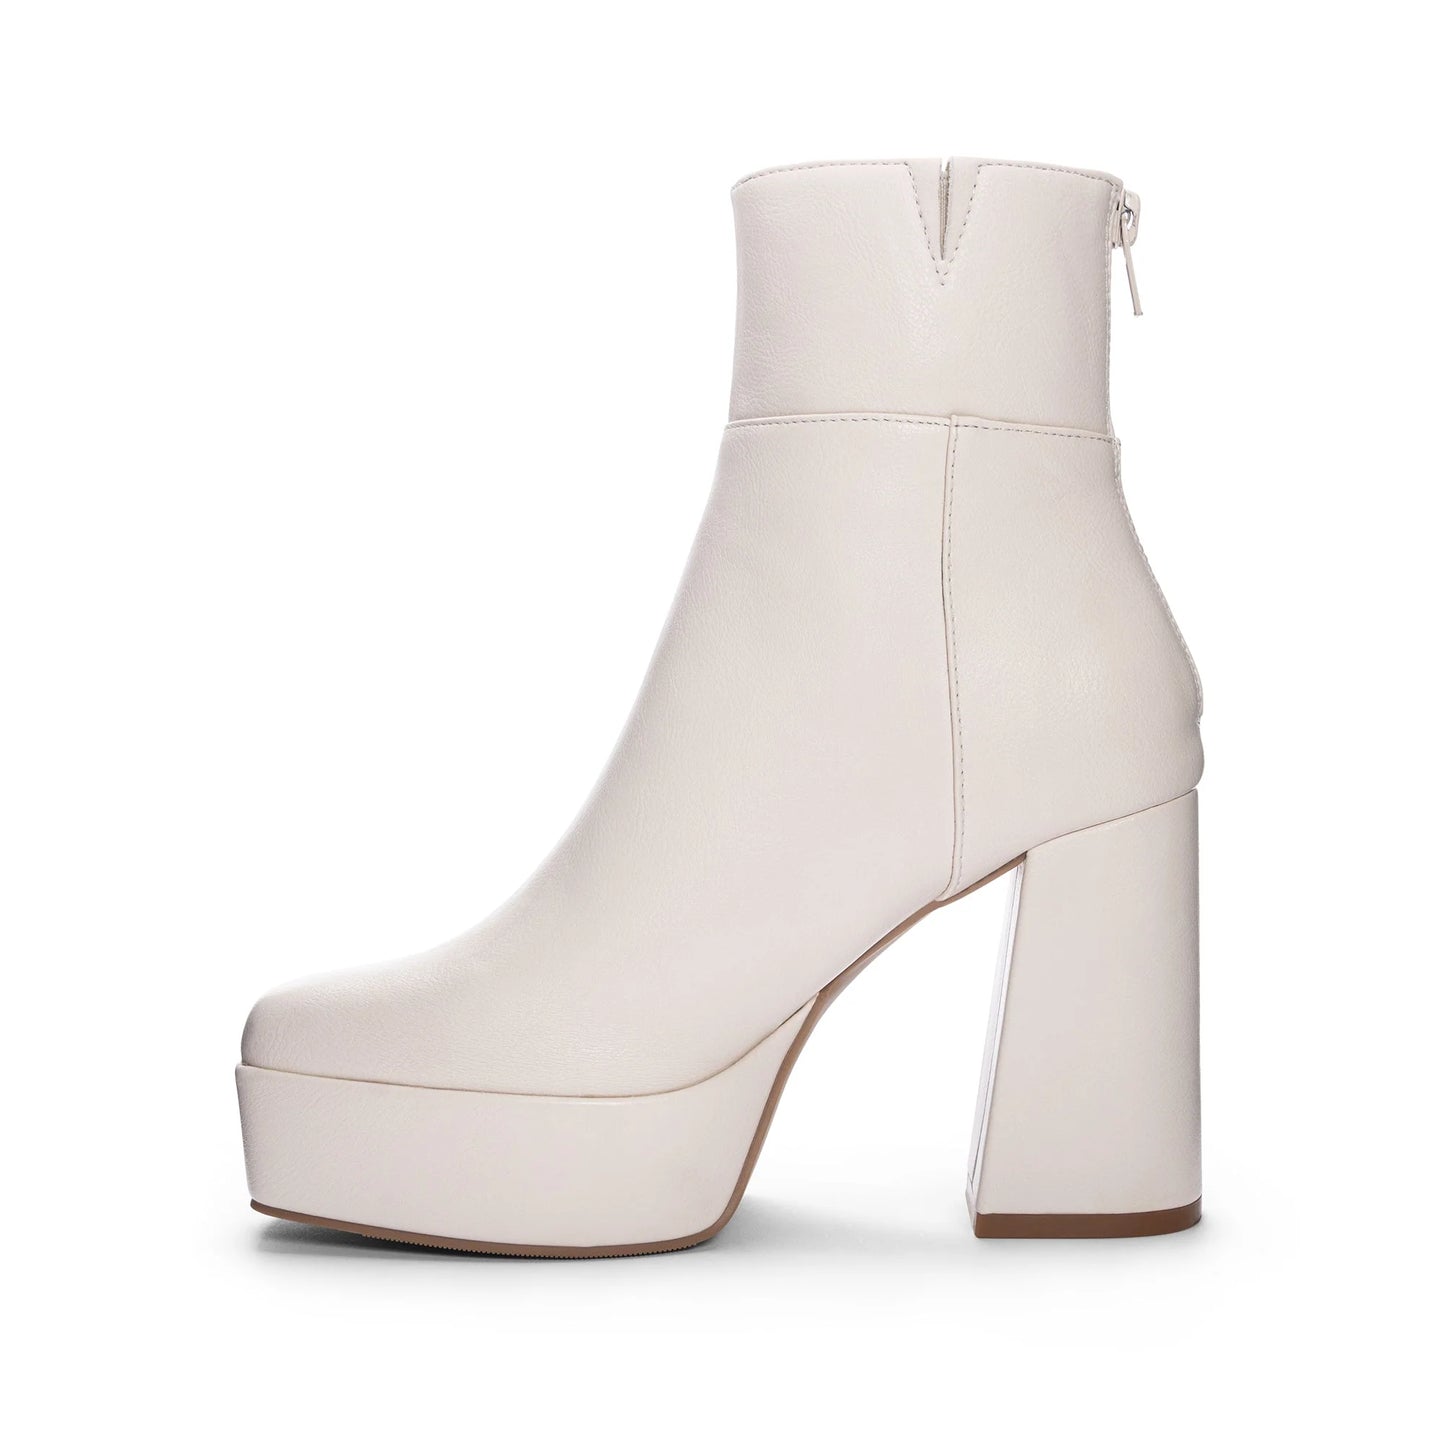 Chinese Laundry Norra Bootie